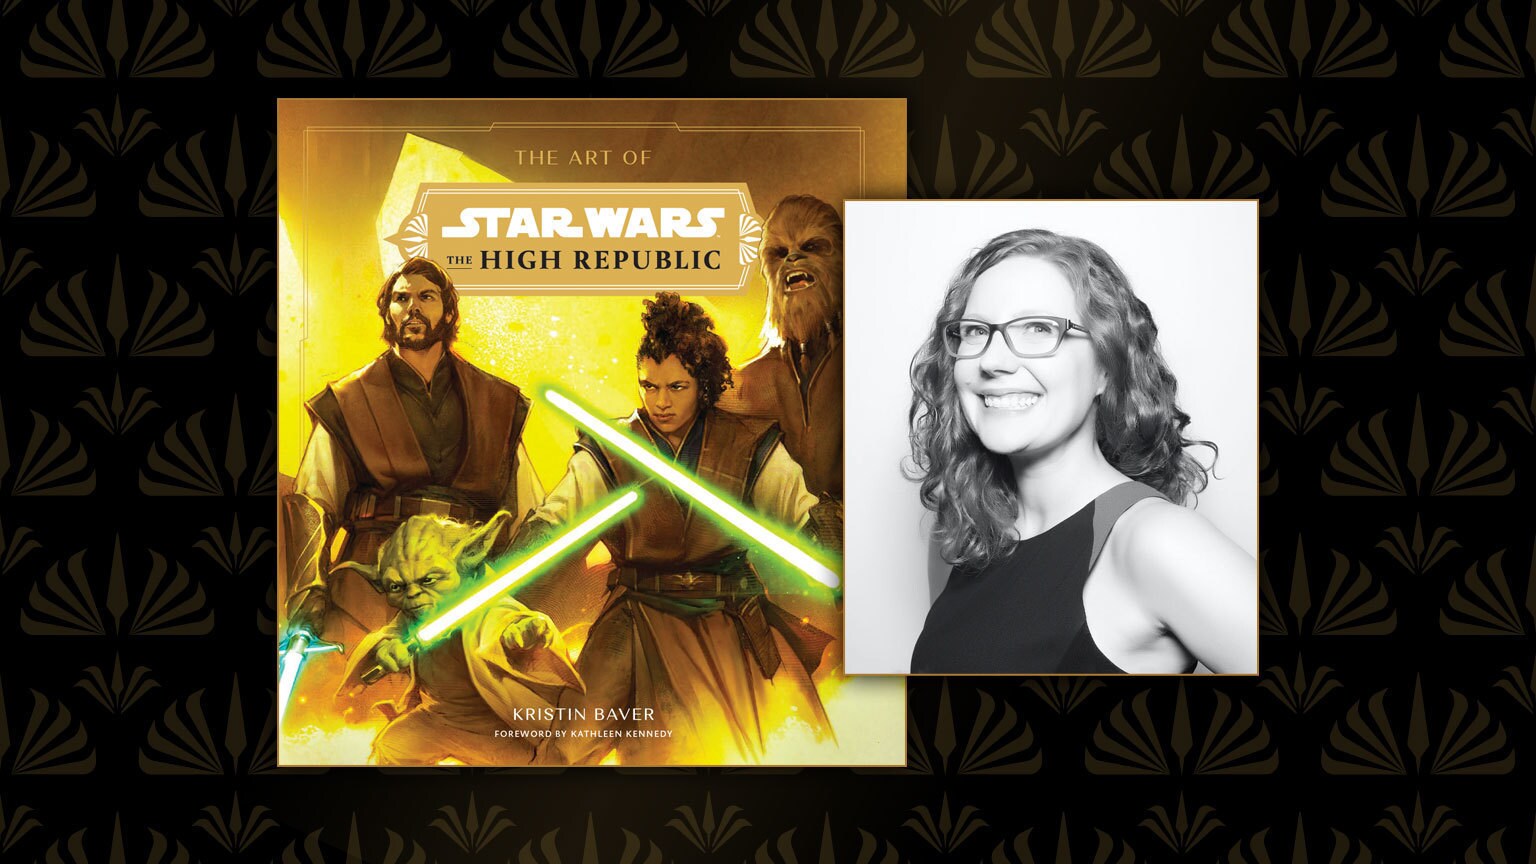 “An Indescribably Great Feeling”: Author Kristin Baver On Writing The Art of Star Wars: The High Republic